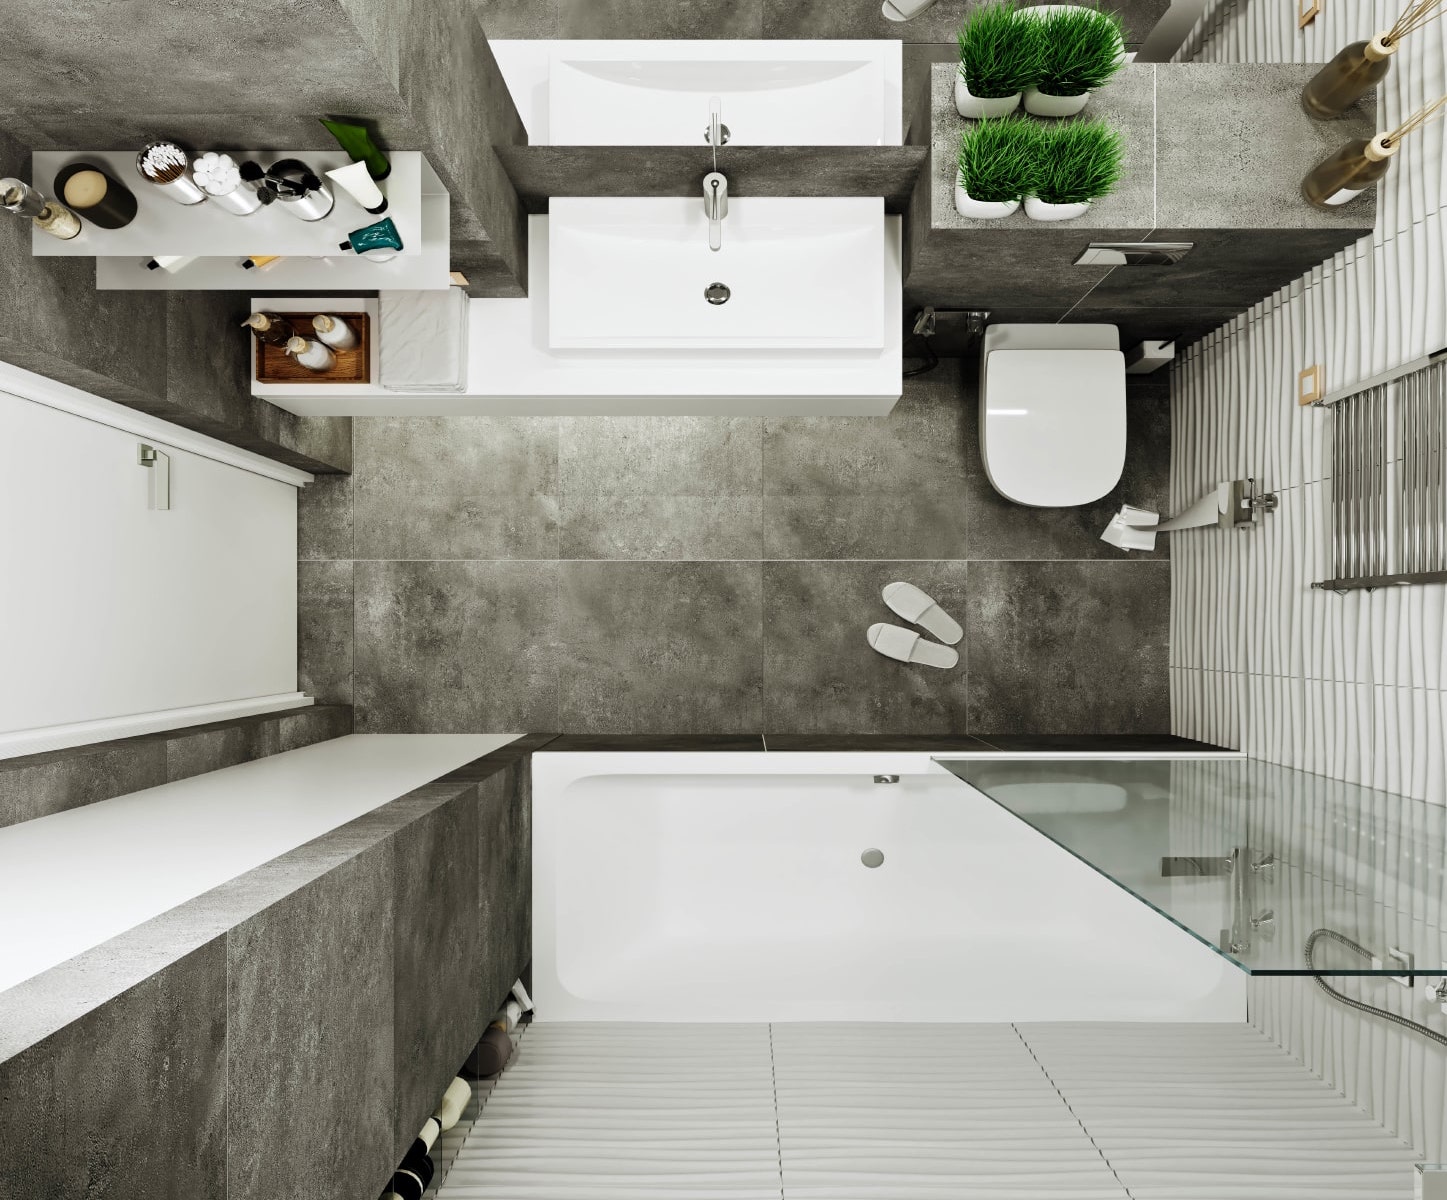 10 Narrow Bathroom Ideas – Be Inspired By These Beautiful Designs